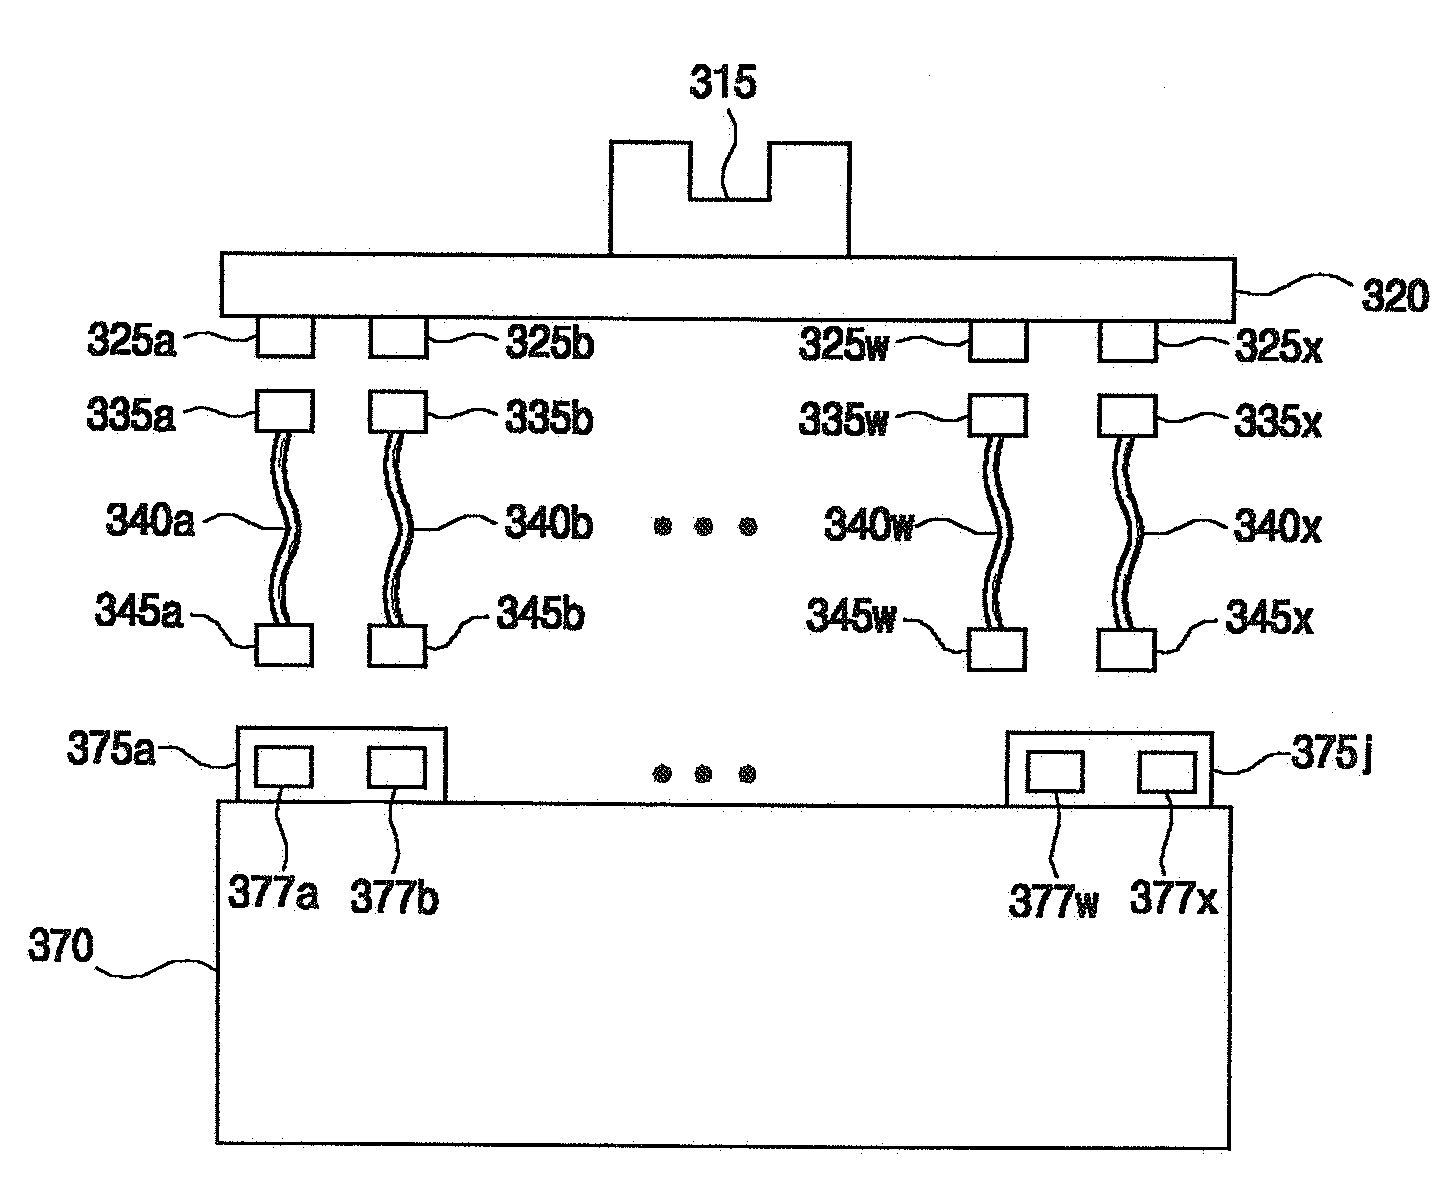 Semiconductor test interface